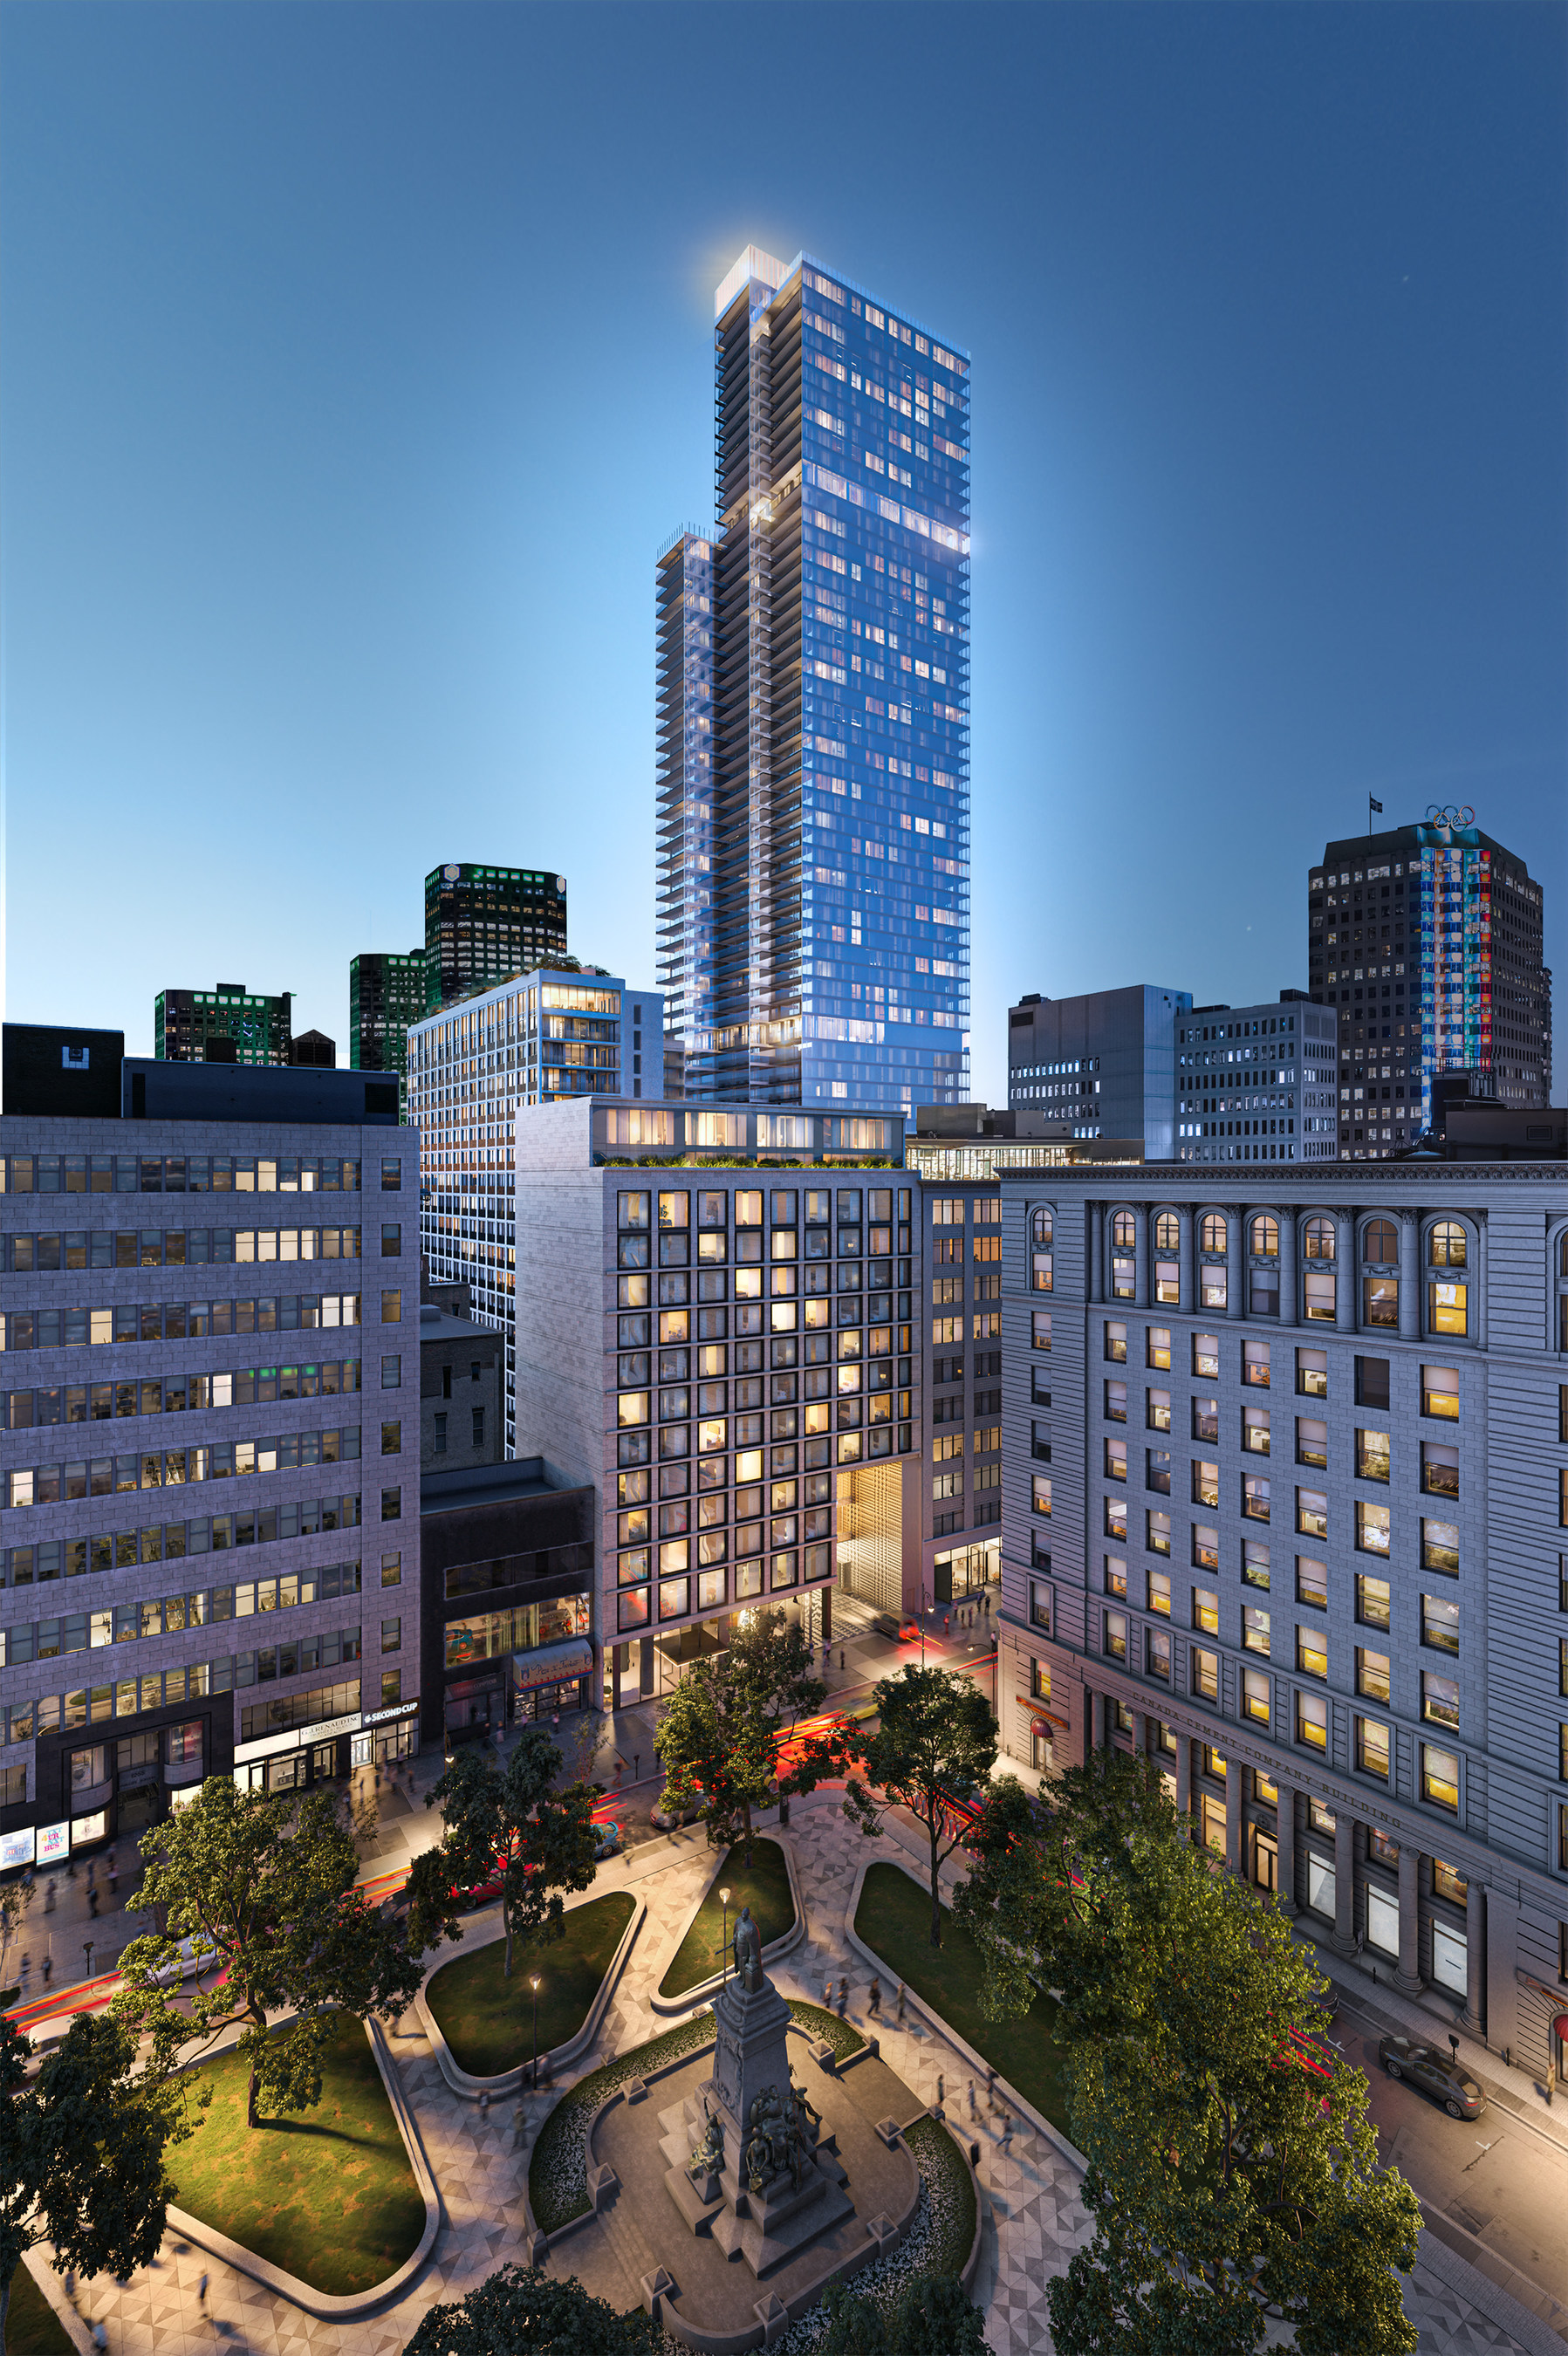 61-Storey Residential Tower in Montreal Registering Strong Sales